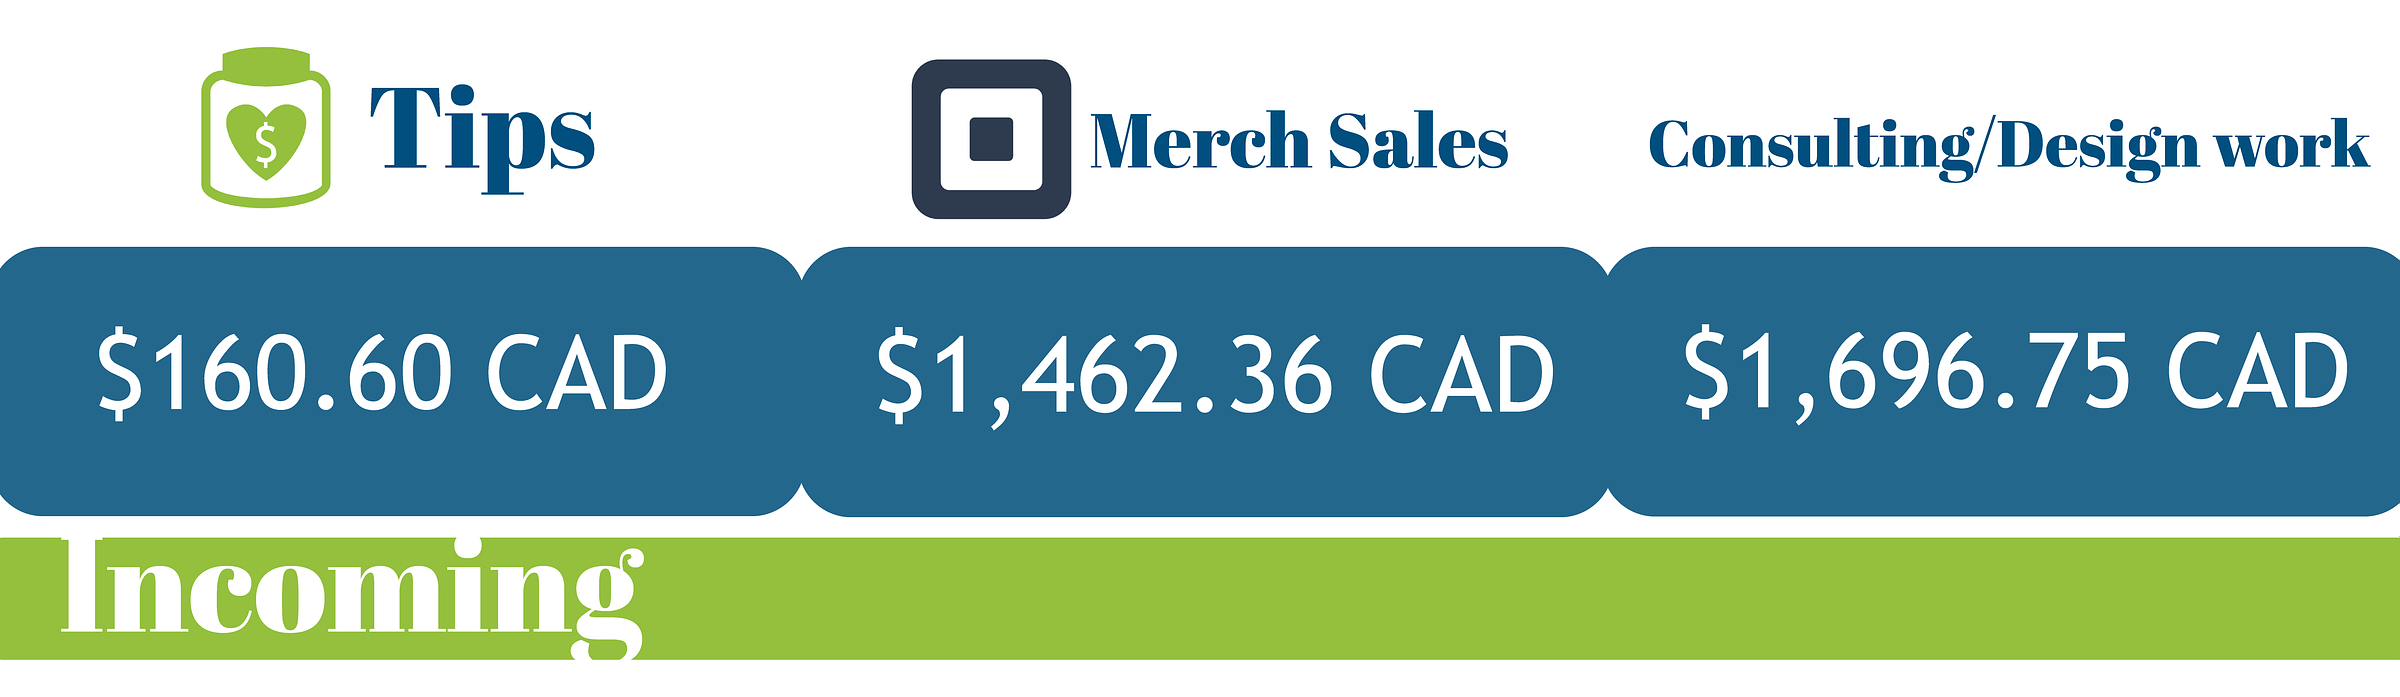 Graphic showing my income from Tips ($160.60CAD), Merch sales ($1,462.36), and consulting/design work ($1,696.75)